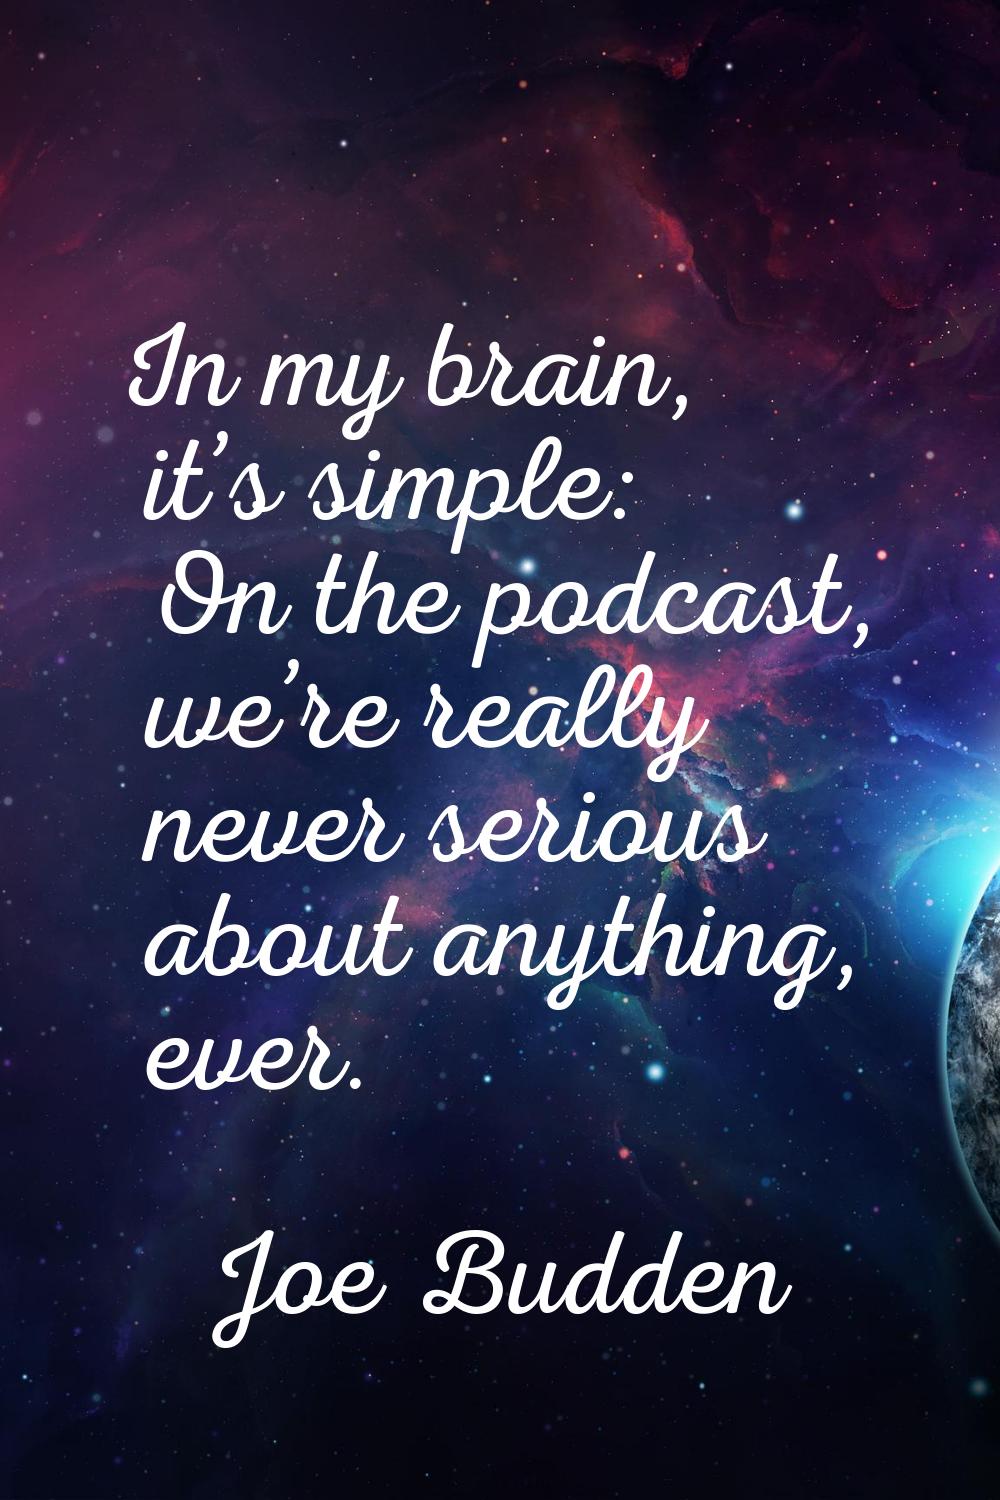 In my brain, it’s simple: On the podcast, we’re really never serious about anything, ever.